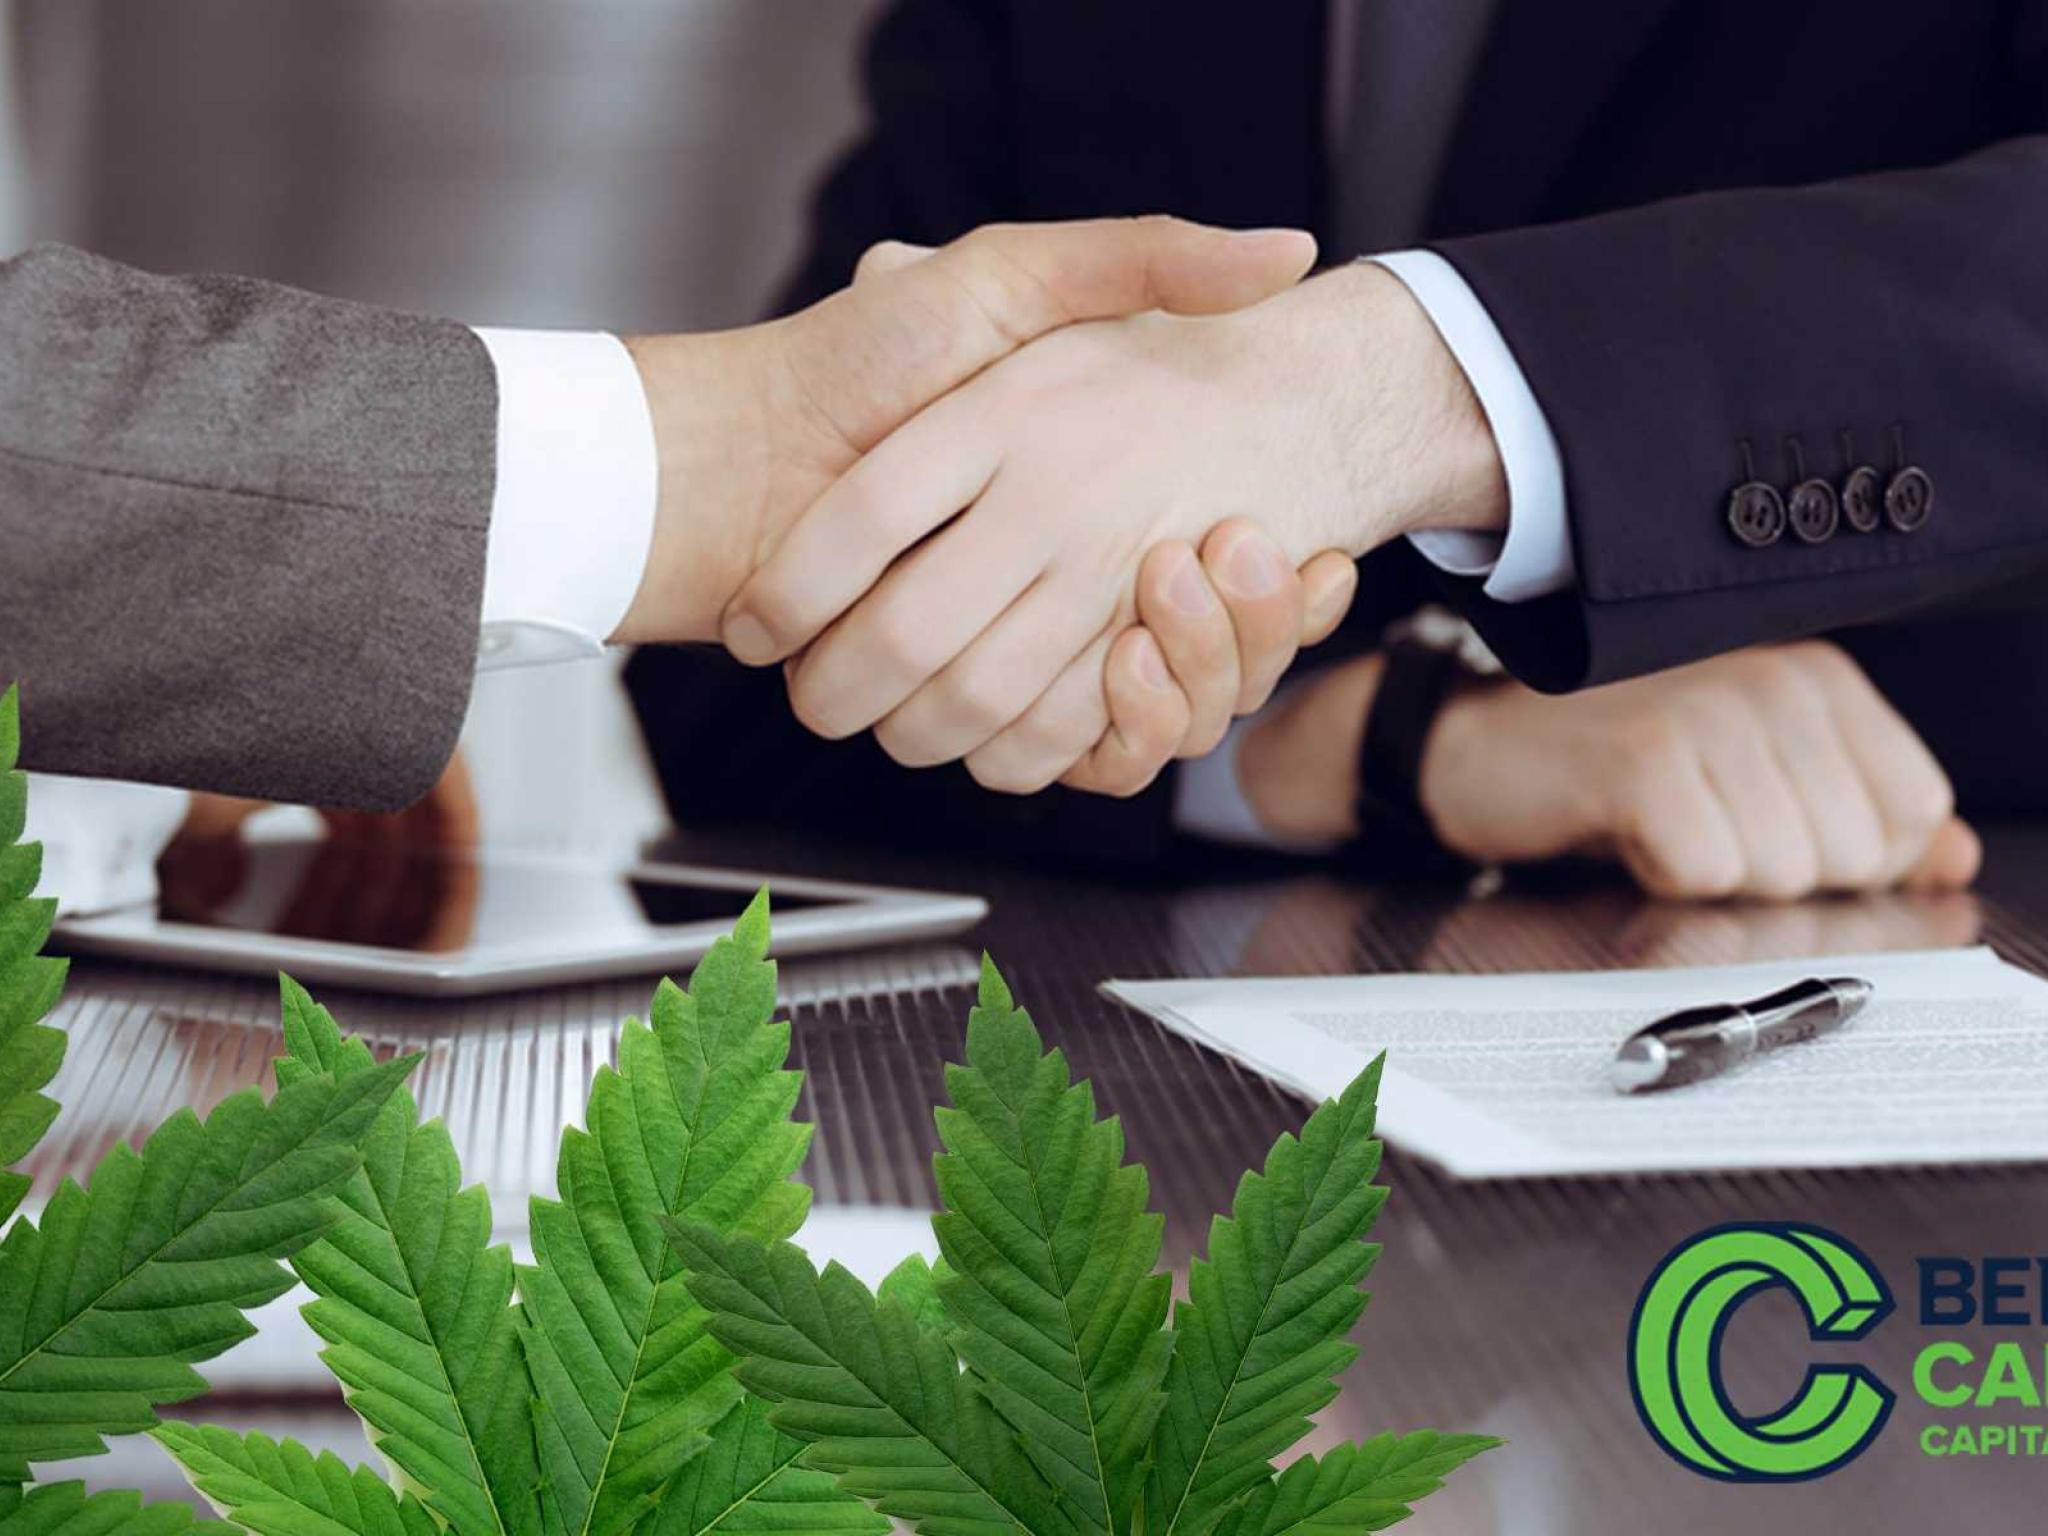  capitalizing-on-cannabis-while-investors-are-scarce-this-co-raises-over-10m-in-funding 